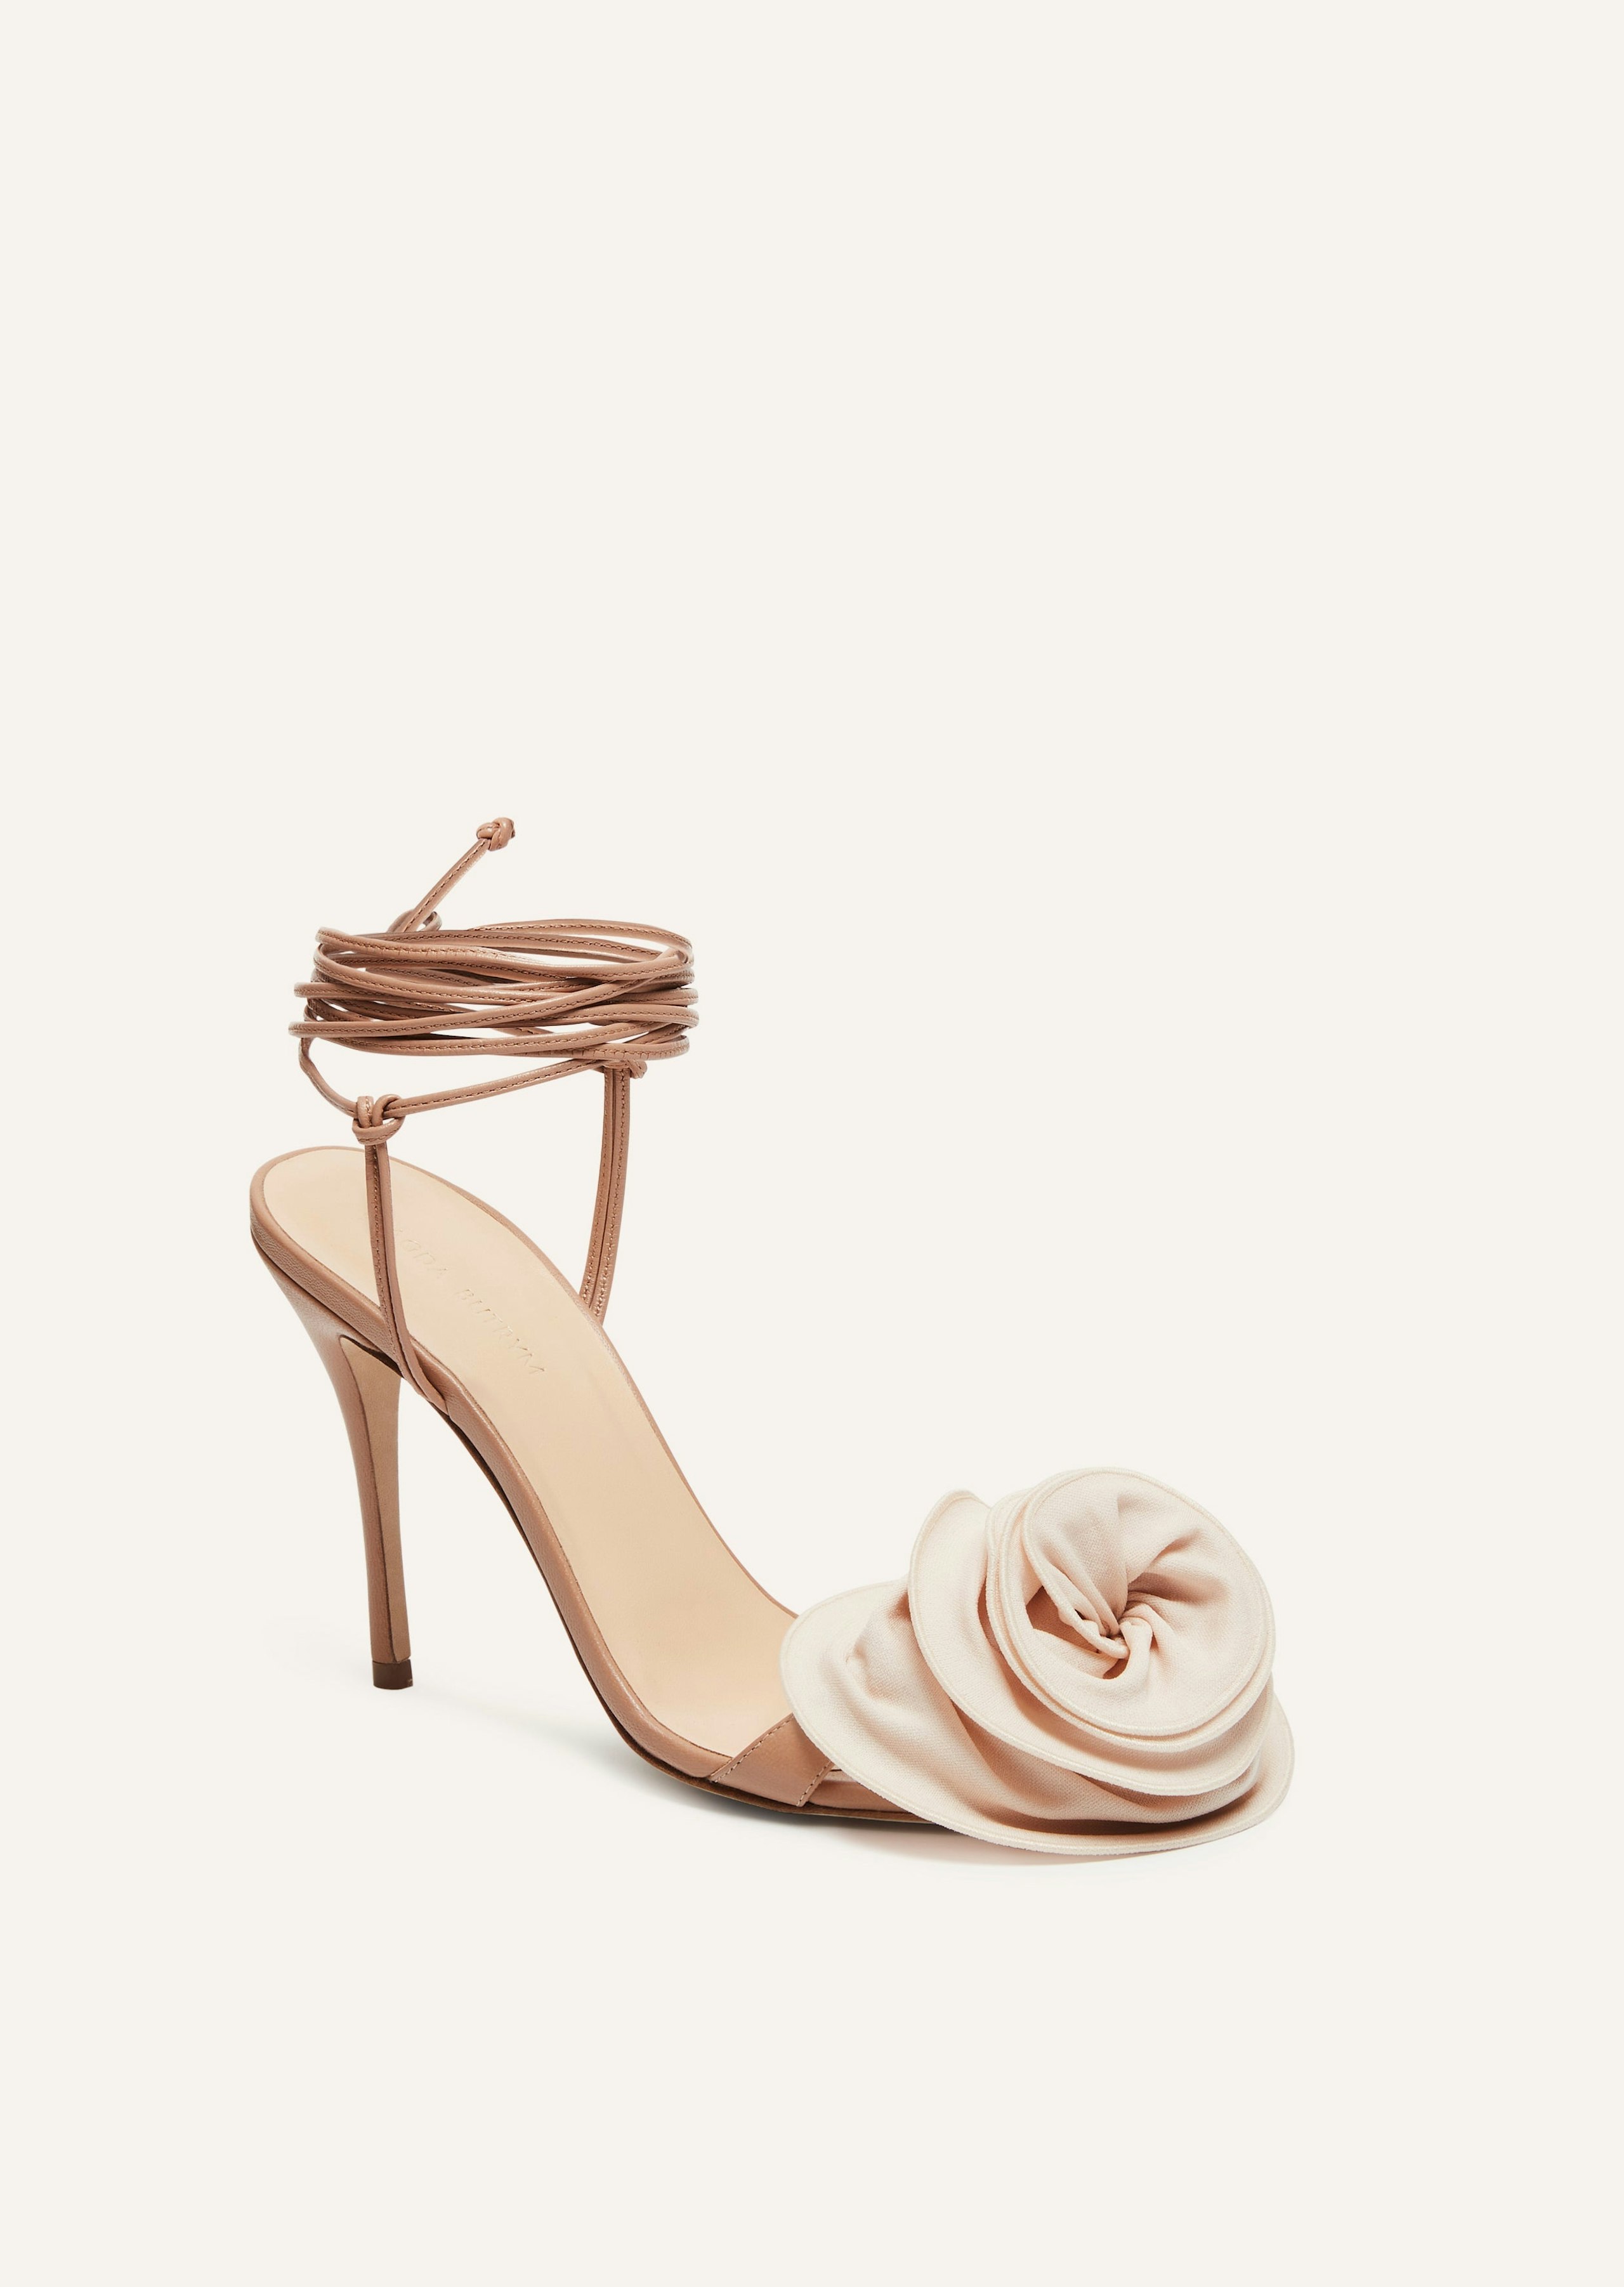 SS23 WRAP AROUND FLOWER SANDALS LEATHER NUDE